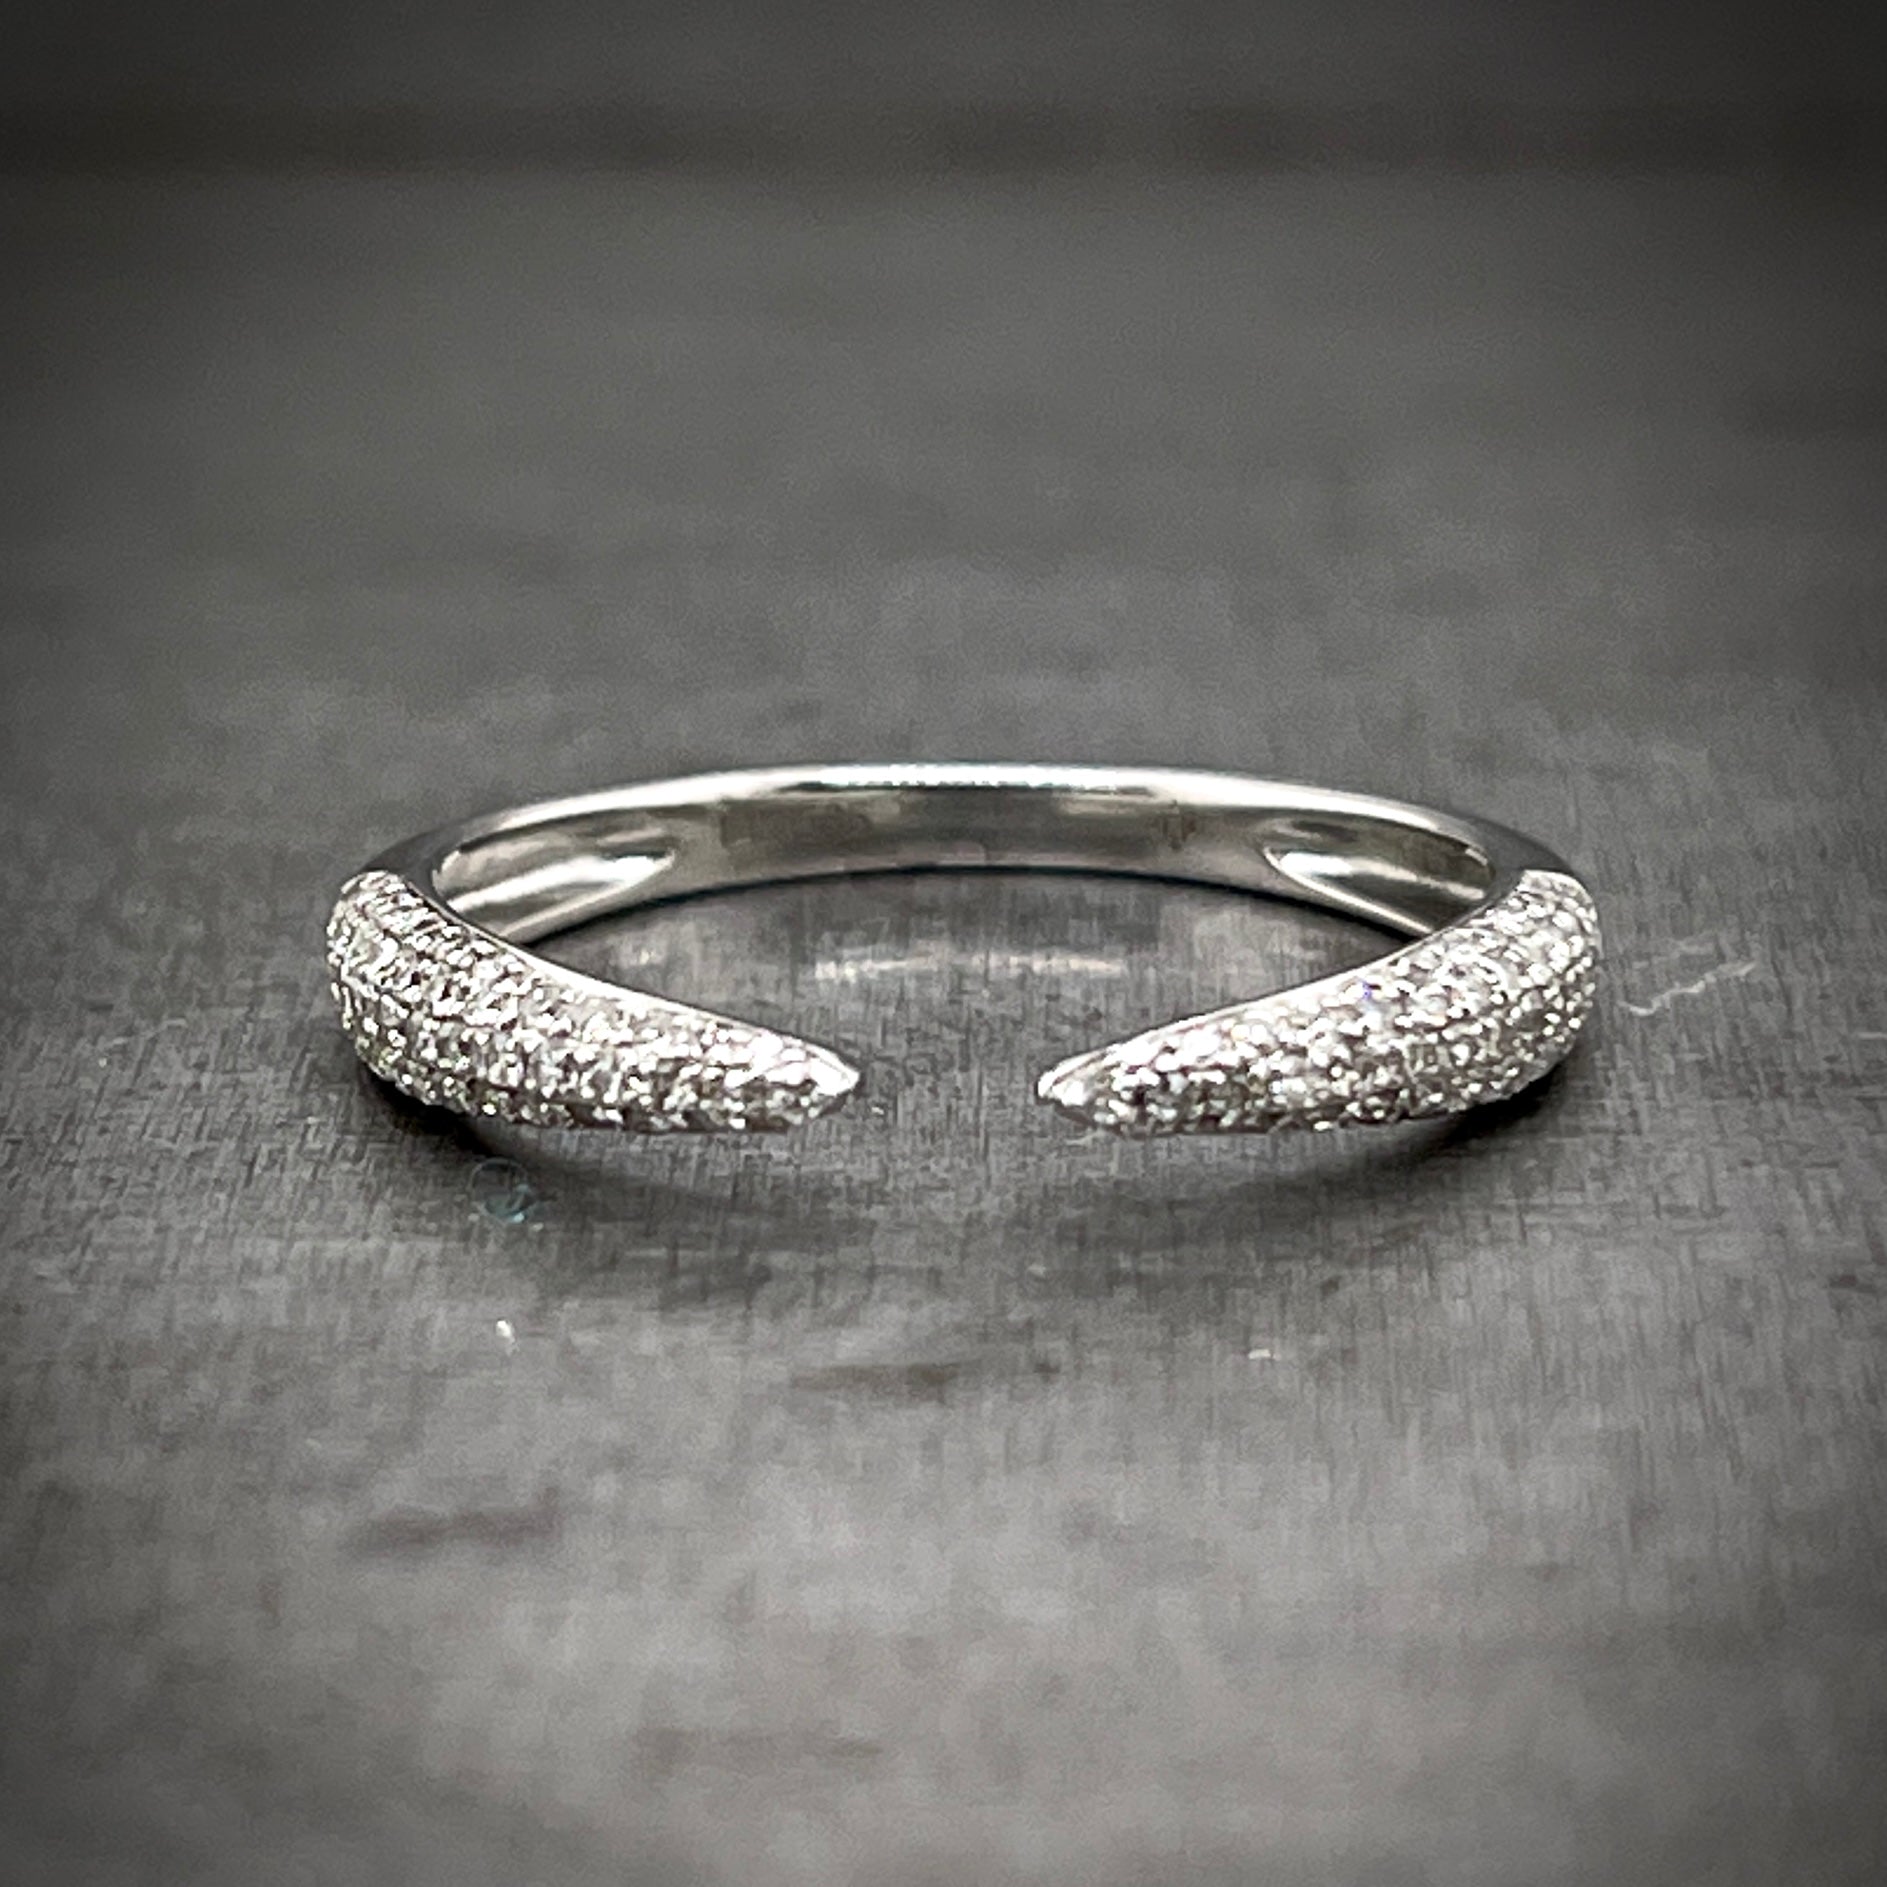 Frontal view of single diamond claw ring.